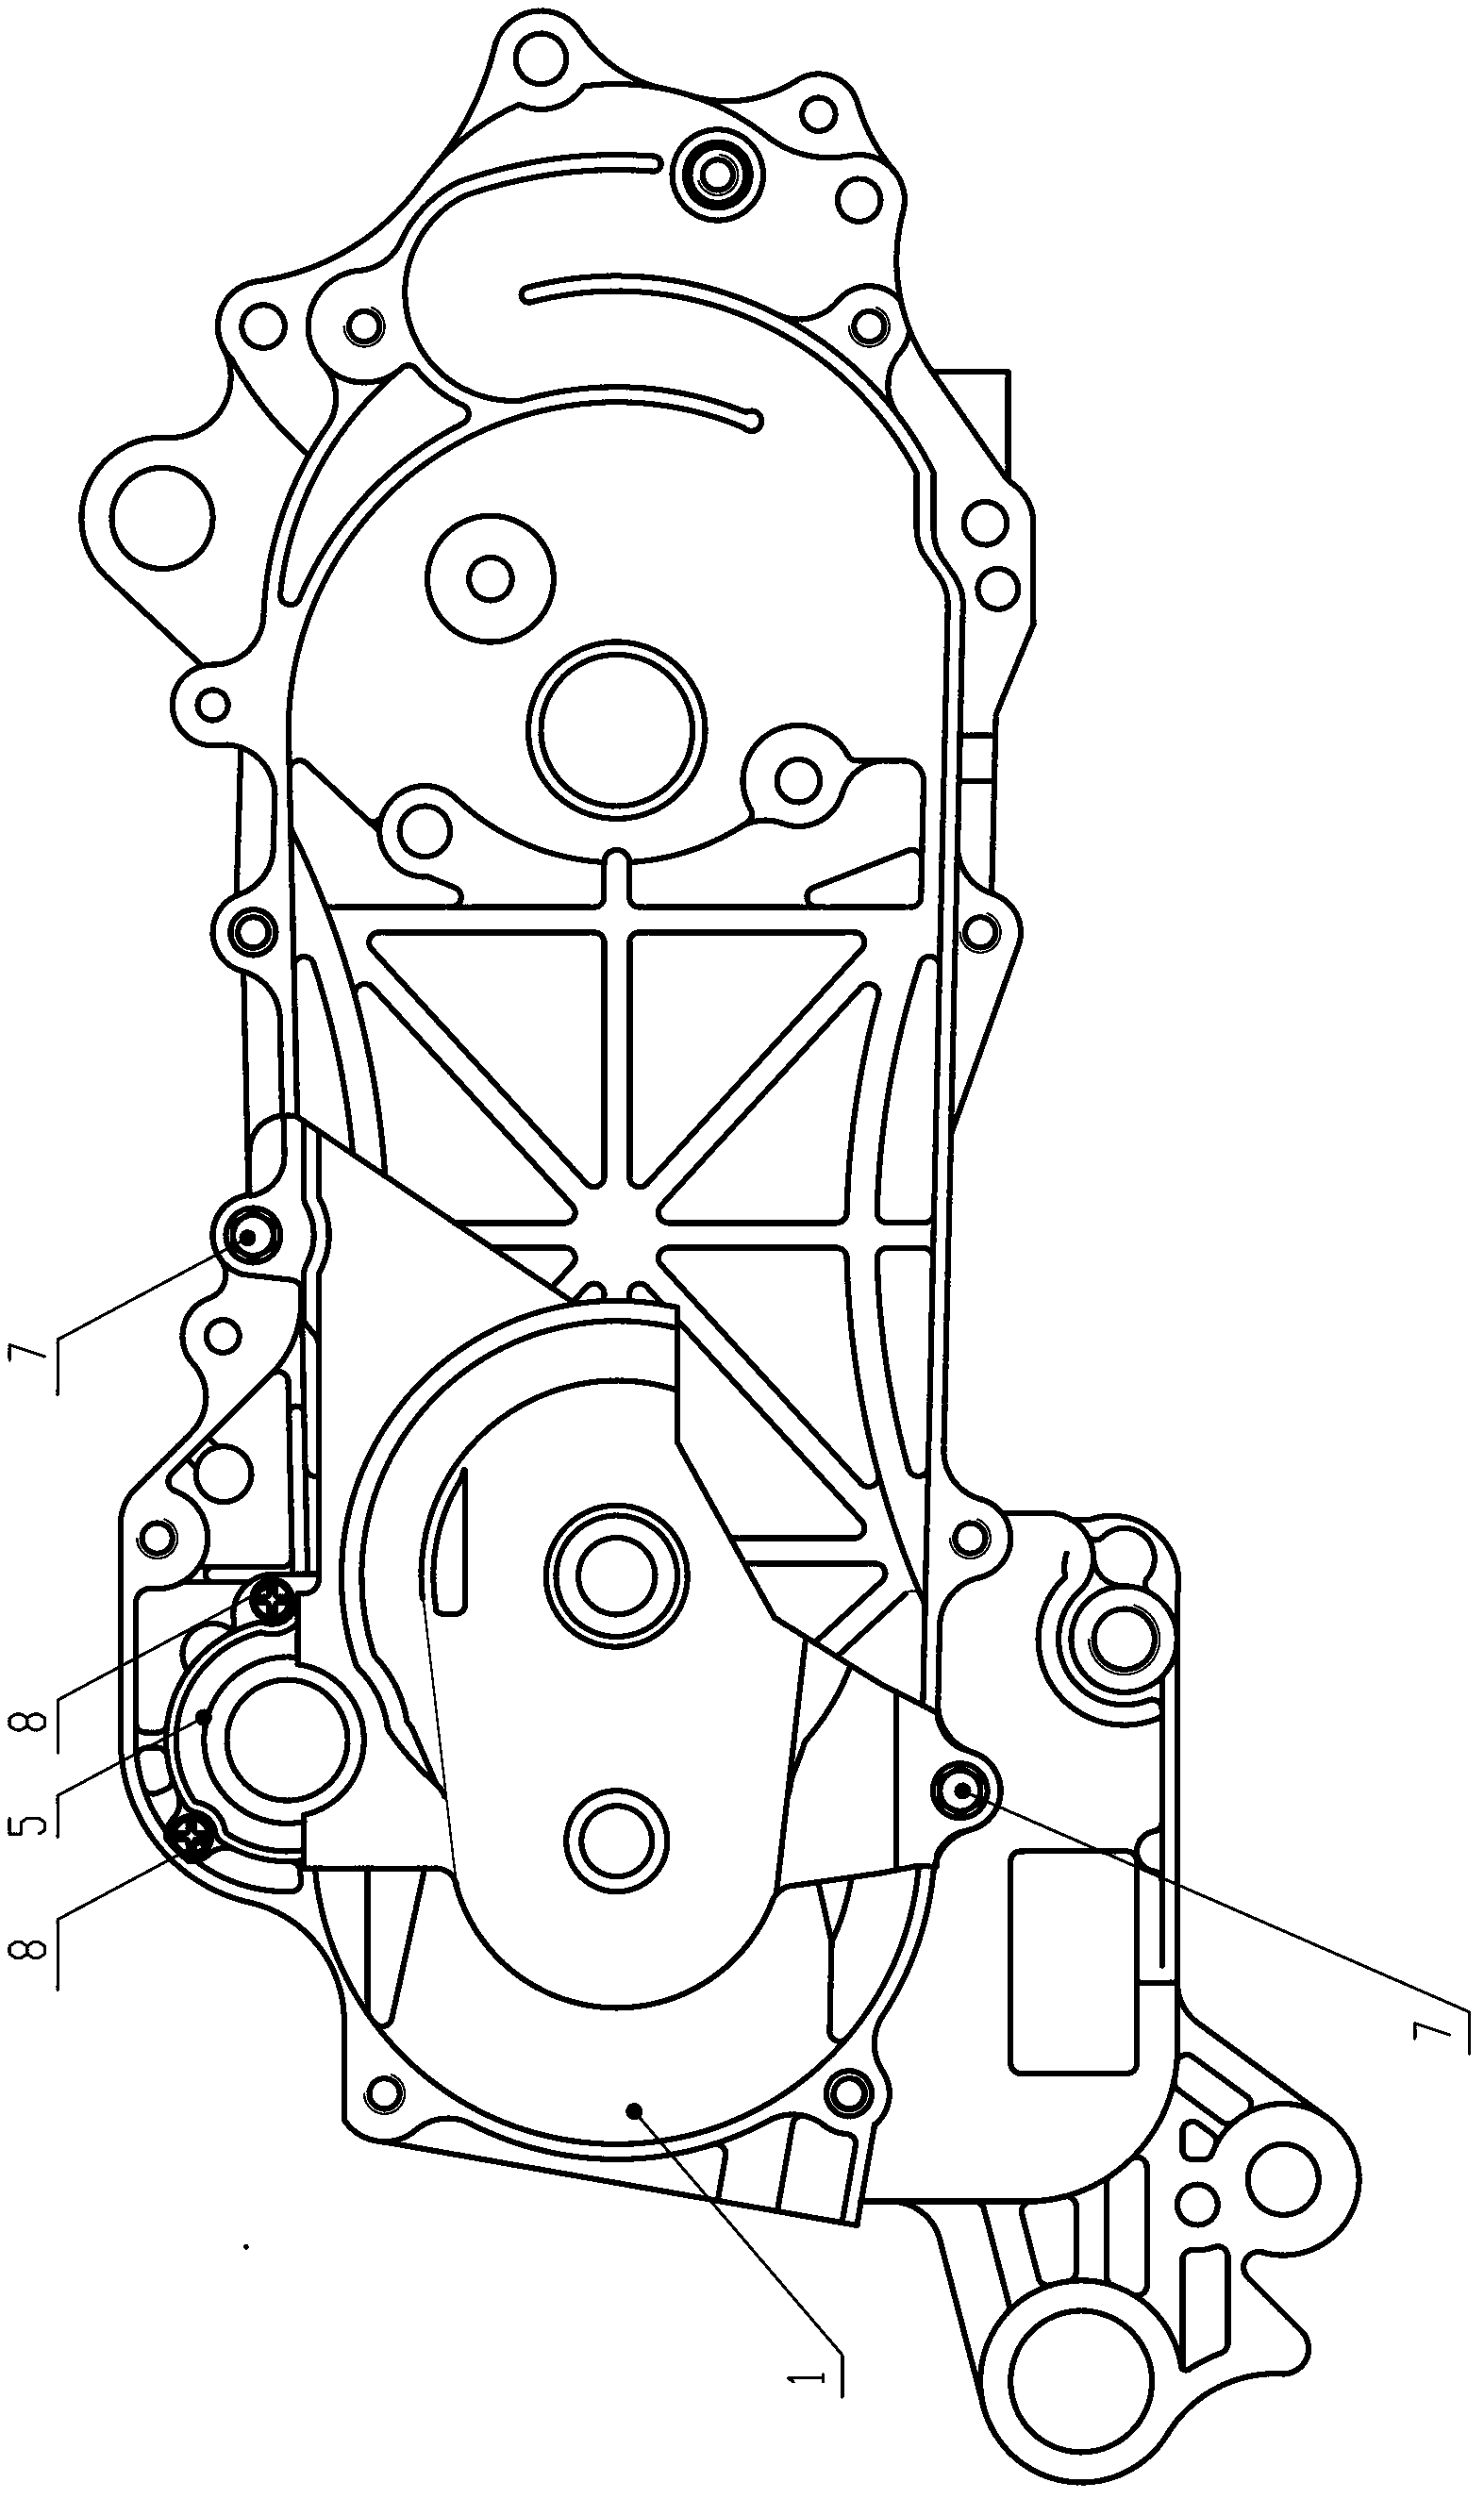 Recoil starting supporting structure for pedal motorcycle engine